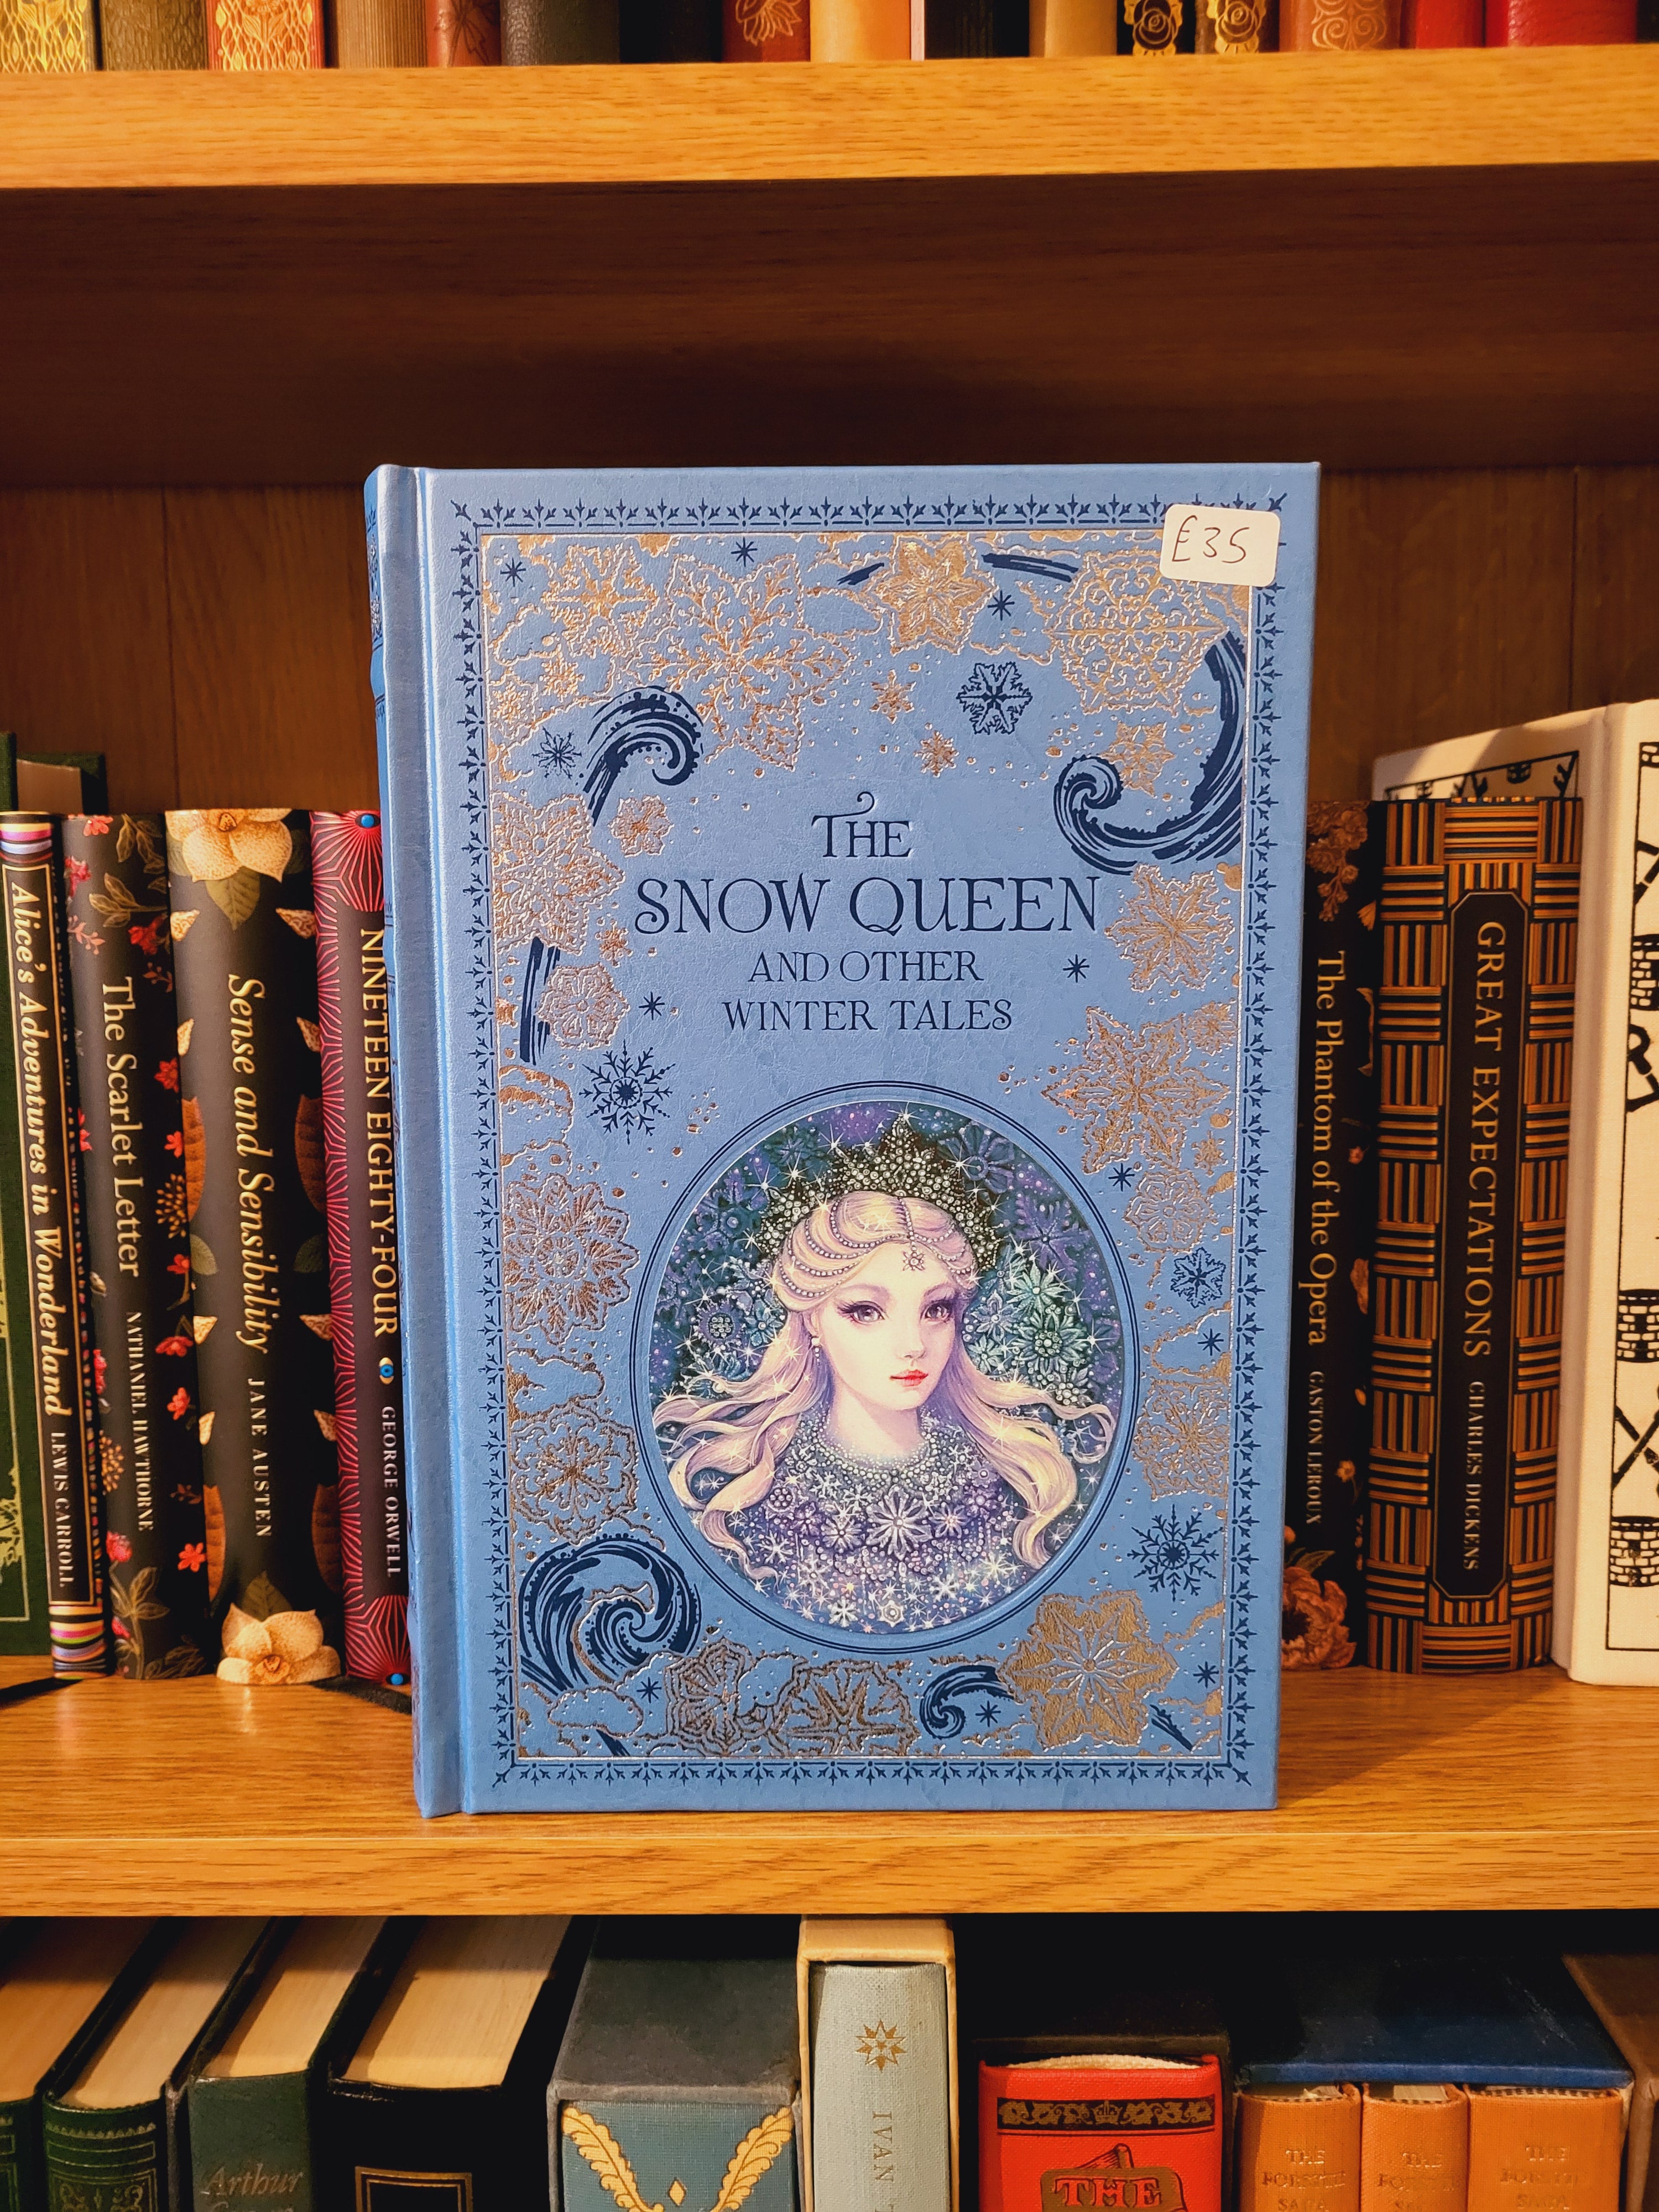 The Snow Queen and other Winter Tales (Barnes & Noble Leatherbound 